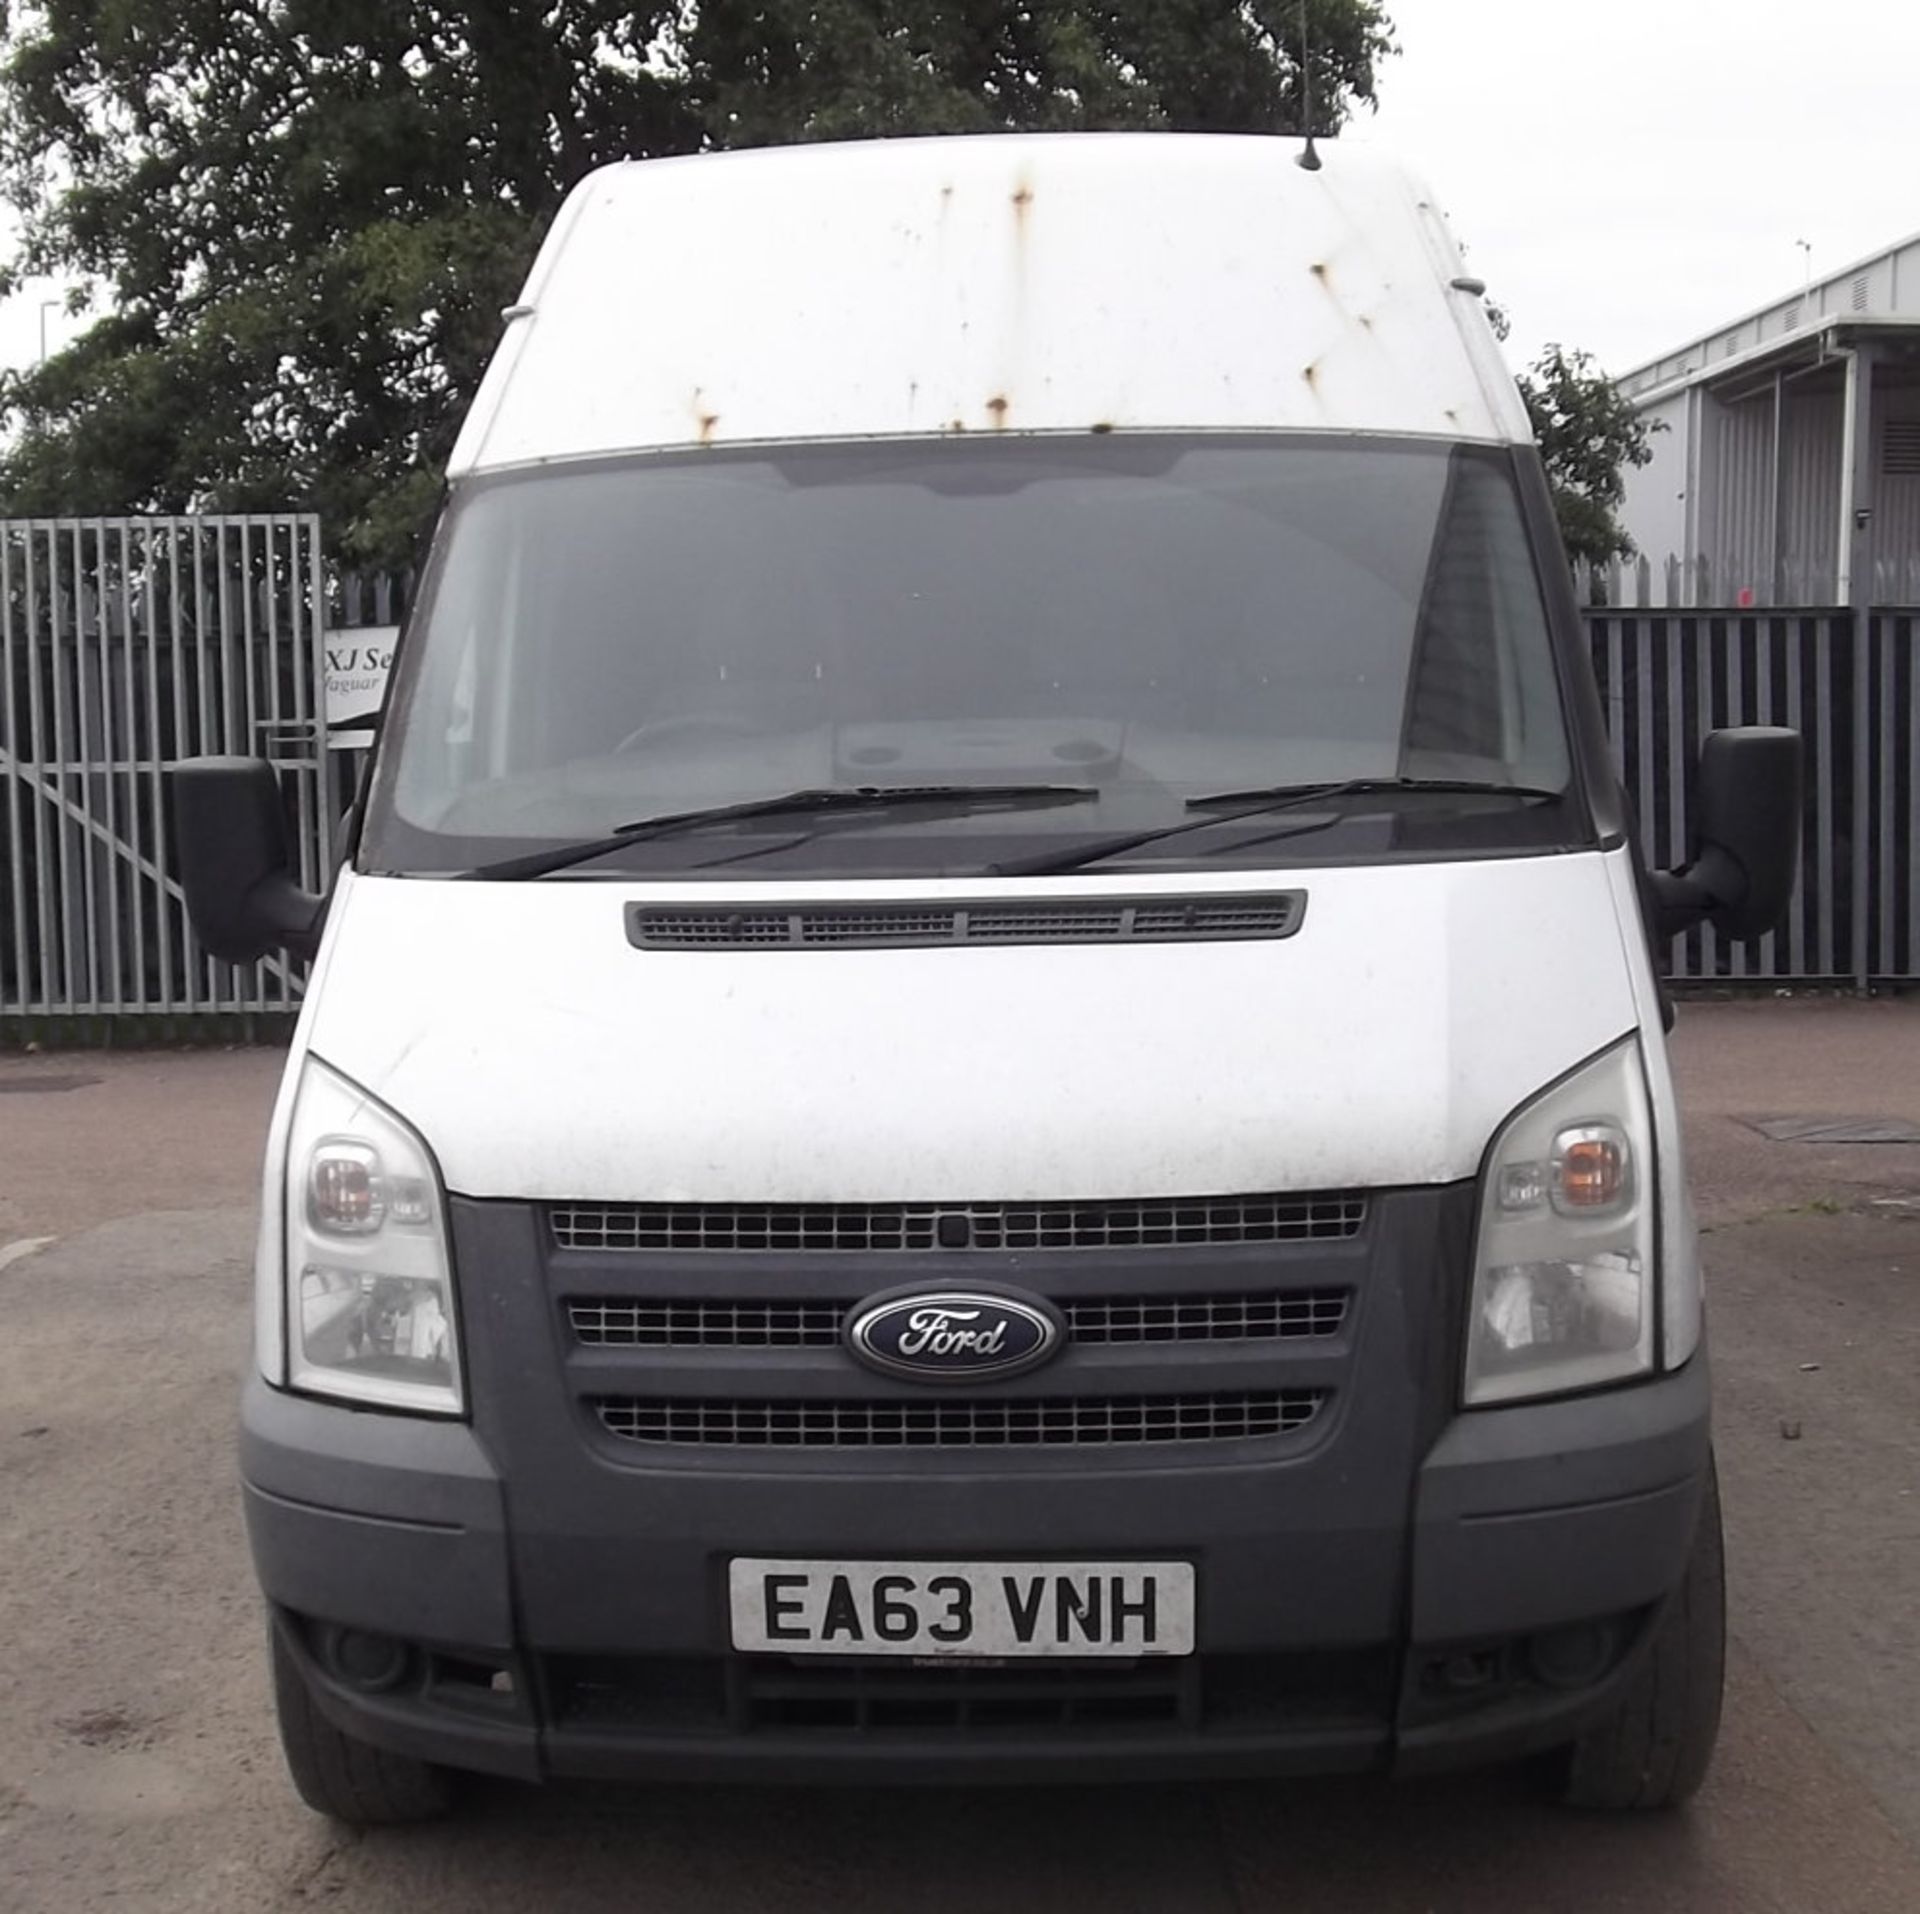 2013 Ford Transit 350 125 LWB MR Panel Van - CL505 - NO VAT ON THE HAMMER - Location: Corby, Northam - Image 6 of 8